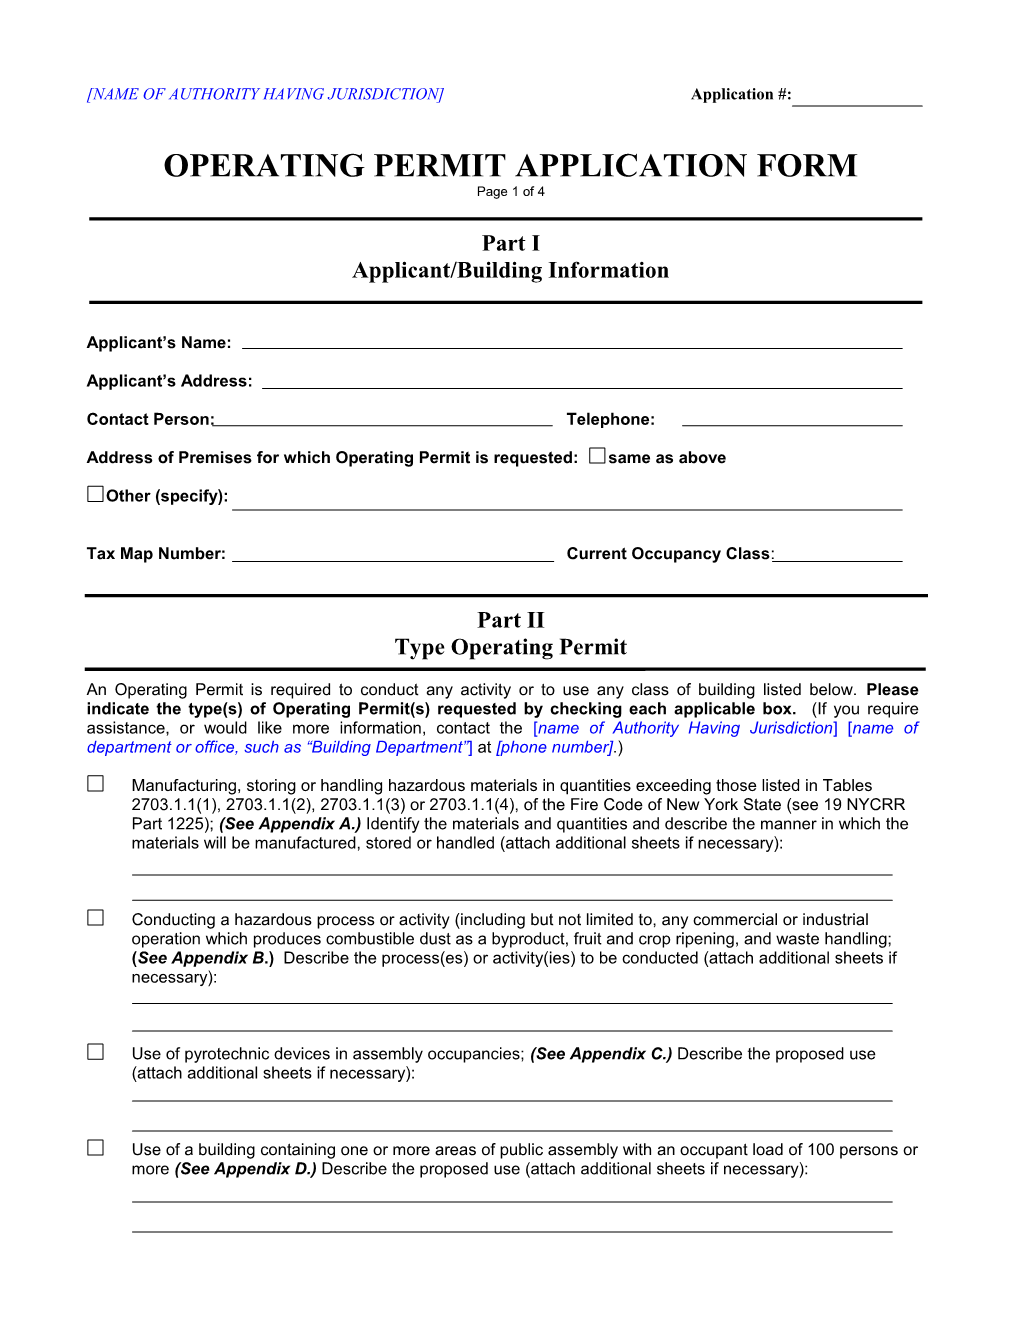 Operating Permit Application Form